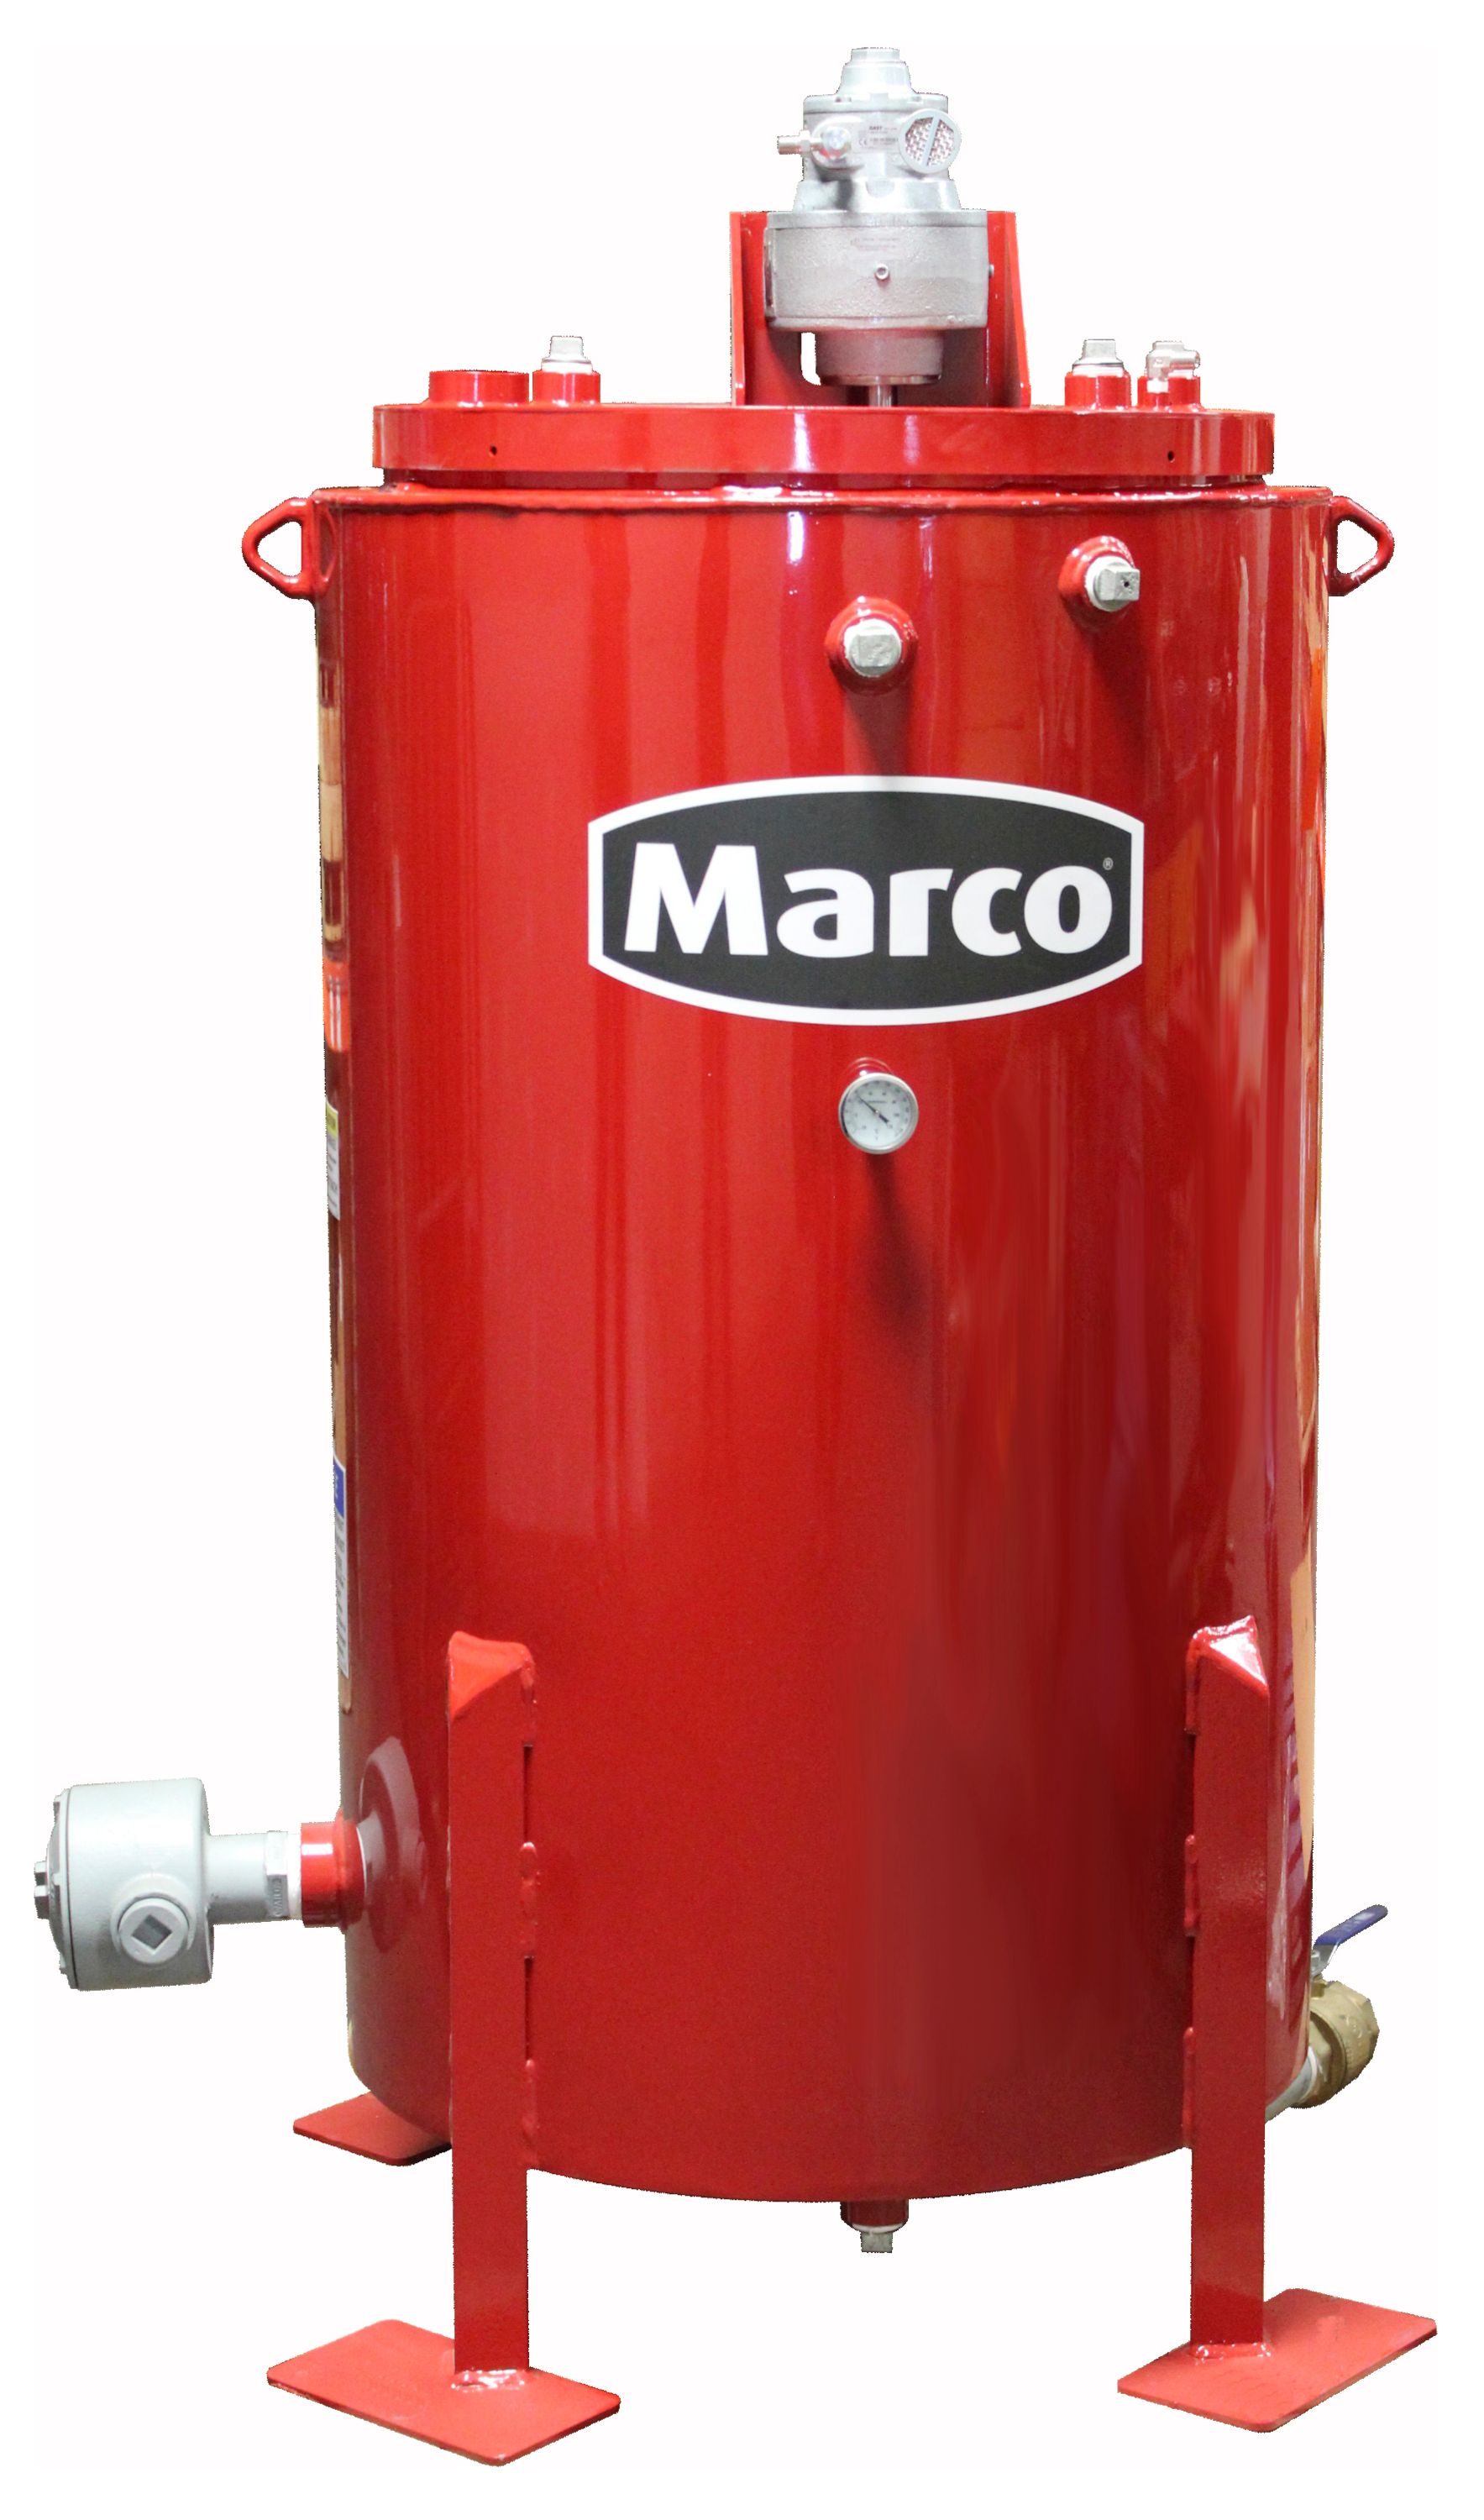 Marco announces release of the Spraymaster 60 gallon heated coatings tank